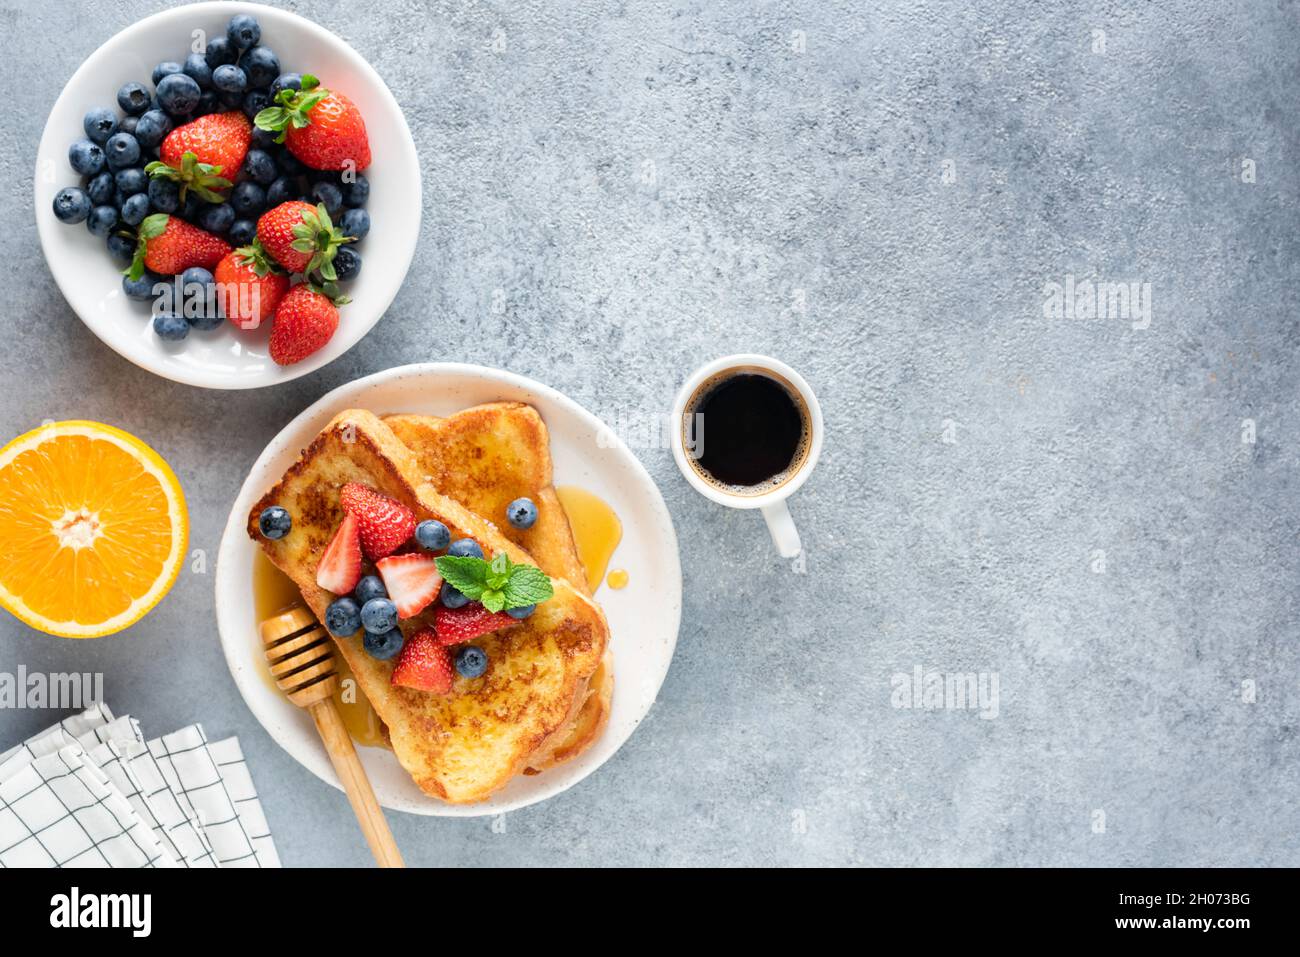 Sweet french toast with berries and cup of coffee on concrete background. Top view, copy space. Breakfast or sweet brunch food Stock Photo